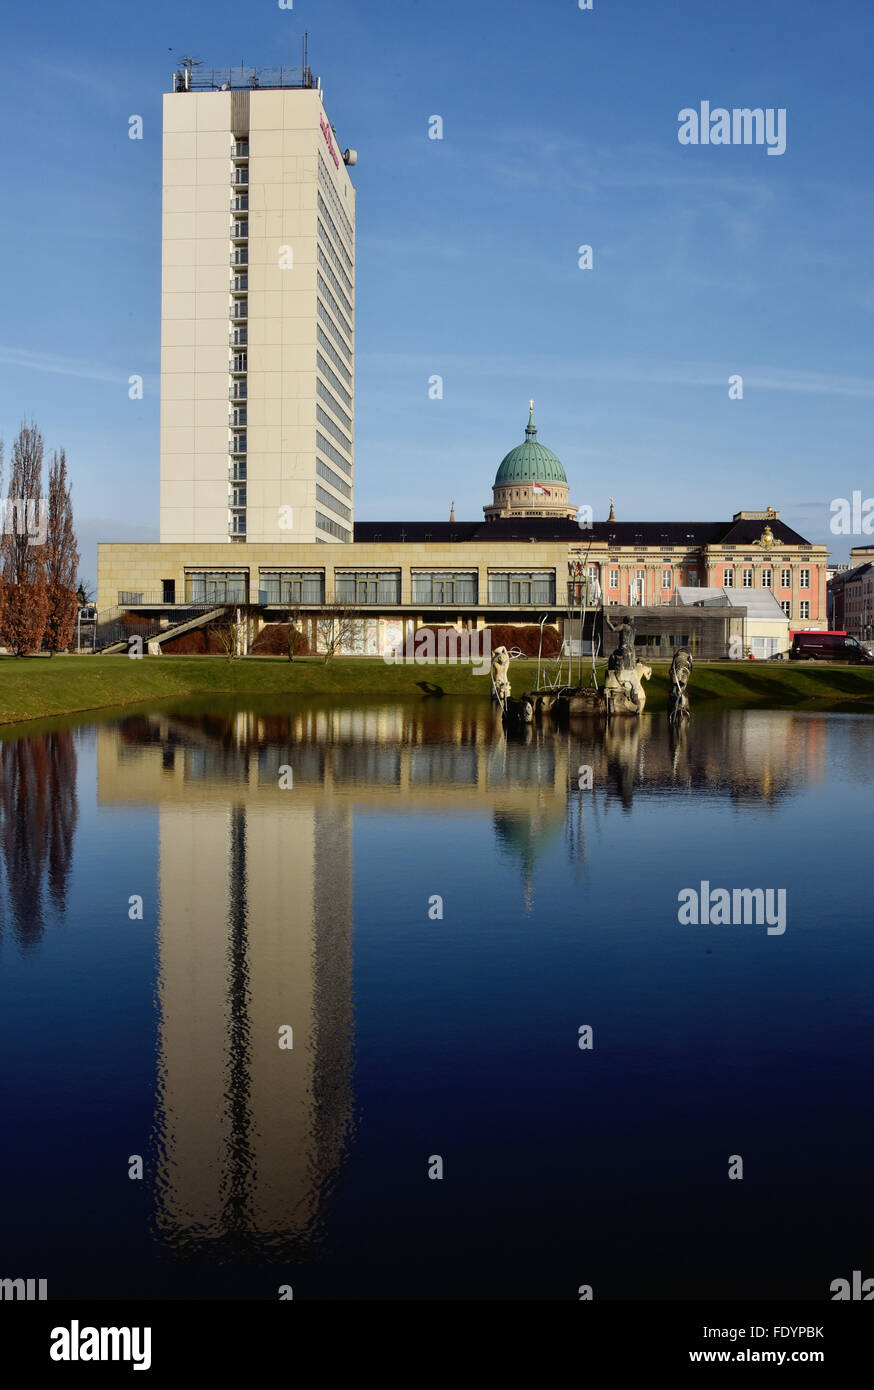 Potsdam, Germany. 02nd Feb, 2016. The Hotel Mercure is reflected in a pond in the Lustgarten in Potsdam, Germany, 02 February 2016. The pond was put in by Frederick I of Prussia of Prussia at the start of the 18th century for his yacht. The sculptures were added after 1749 under Frederick II. Photo: BERND SETTNIK/dpa/Alamy Live News Stock Photo